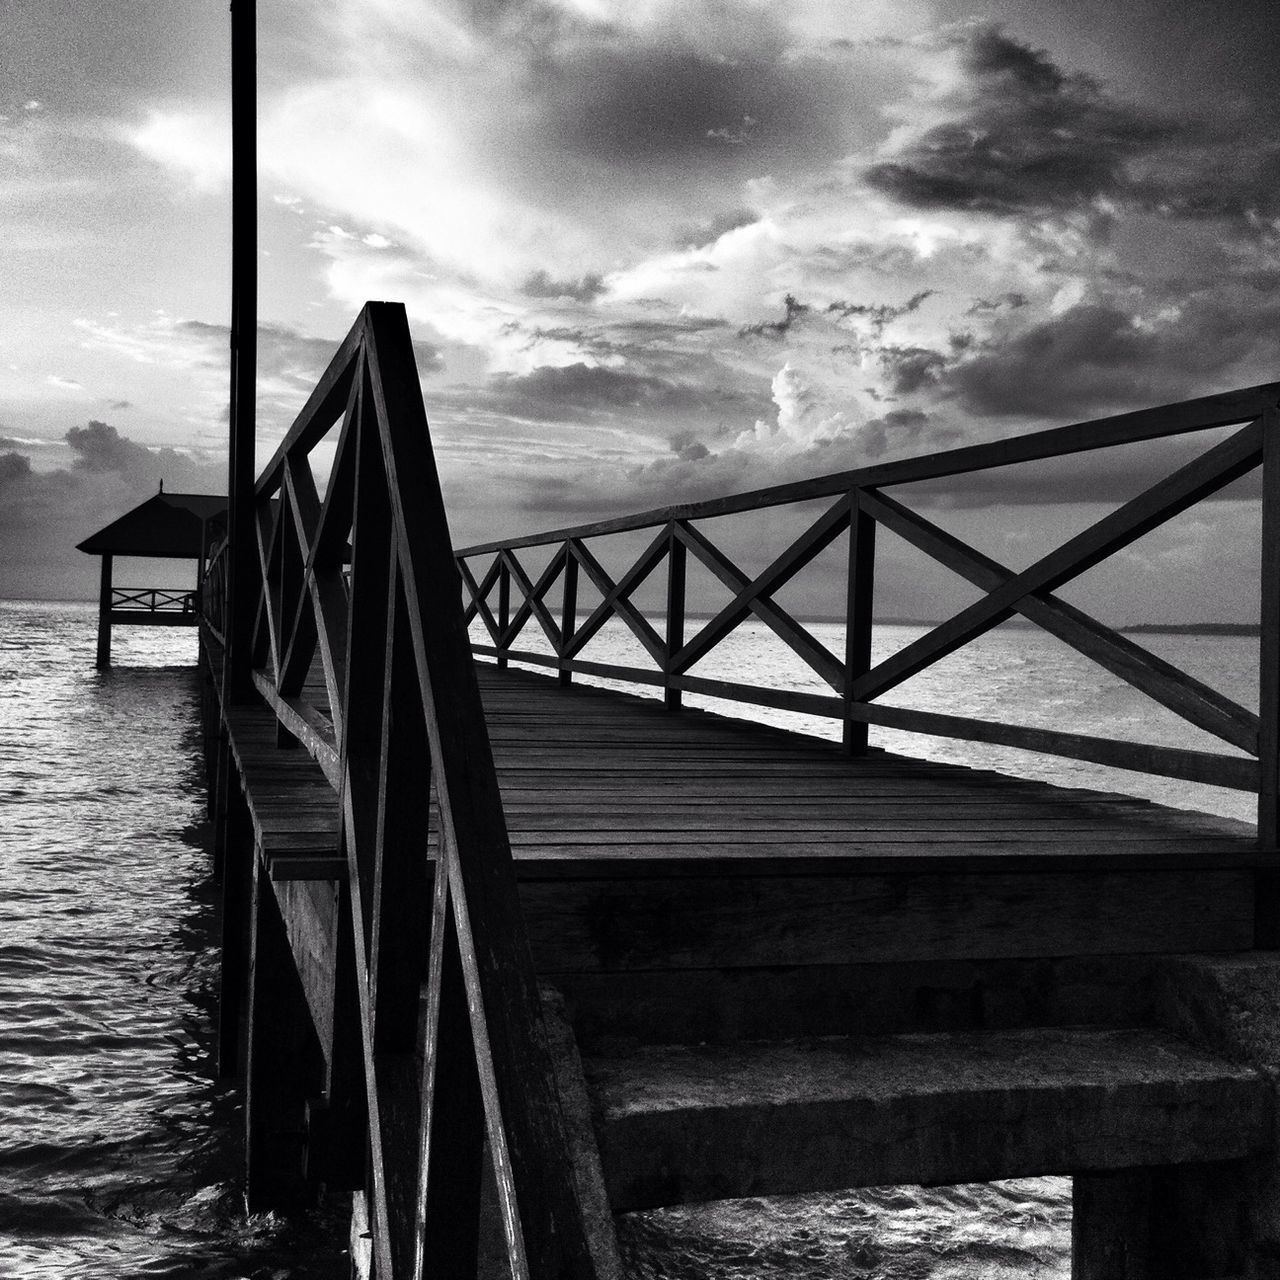 sky, cloud - sky, built structure, wood - material, railing, architecture, cloudy, pier, cloud, water, sea, wooden, wood, tranquility, nature, day, outdoors, weather, no people, tranquil scene